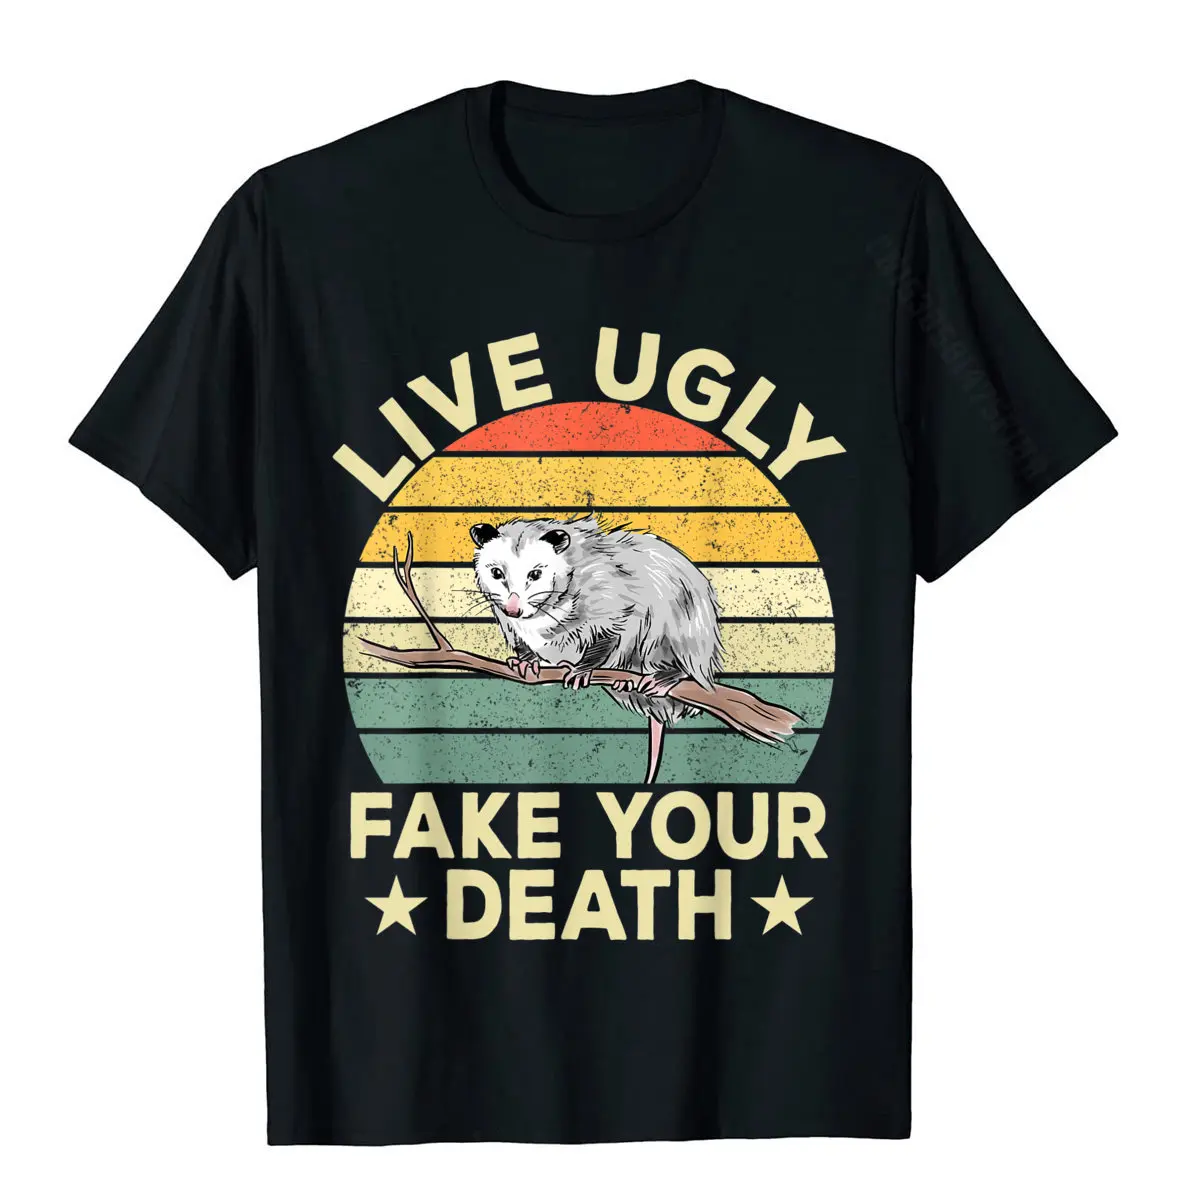 Live Ugly Fake Your Death Retro Vintage Opossum Funny Gifts T-Shirt GroupPrinted Tops Shirt Dominant Cotton Men T Shirts